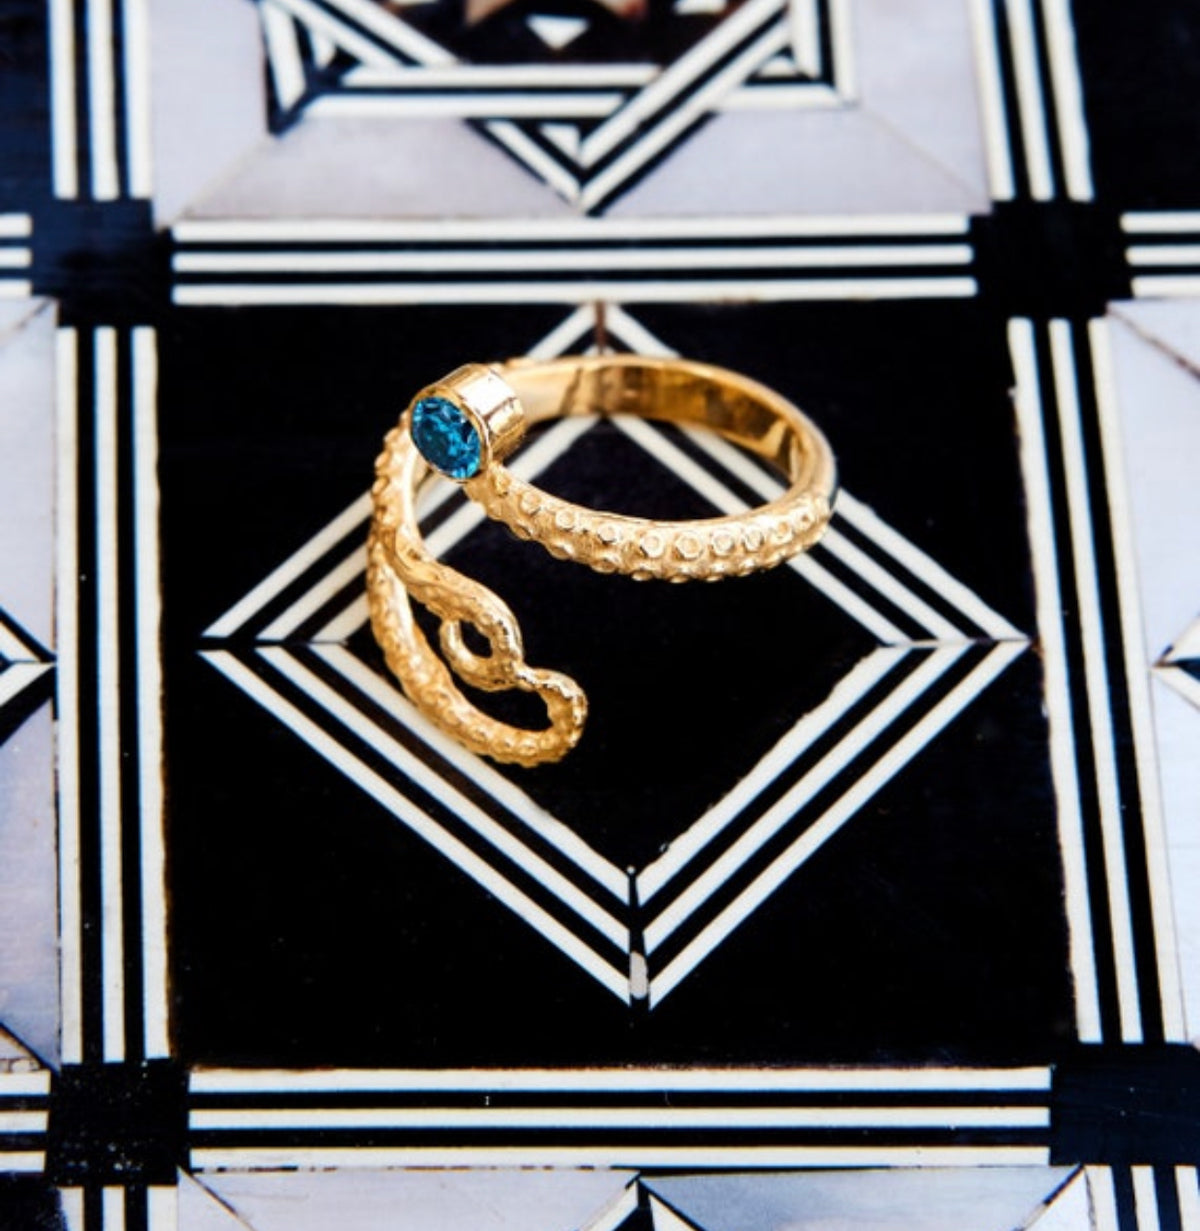 Octopus ring gold and blue gemstone, gold tentacle ring